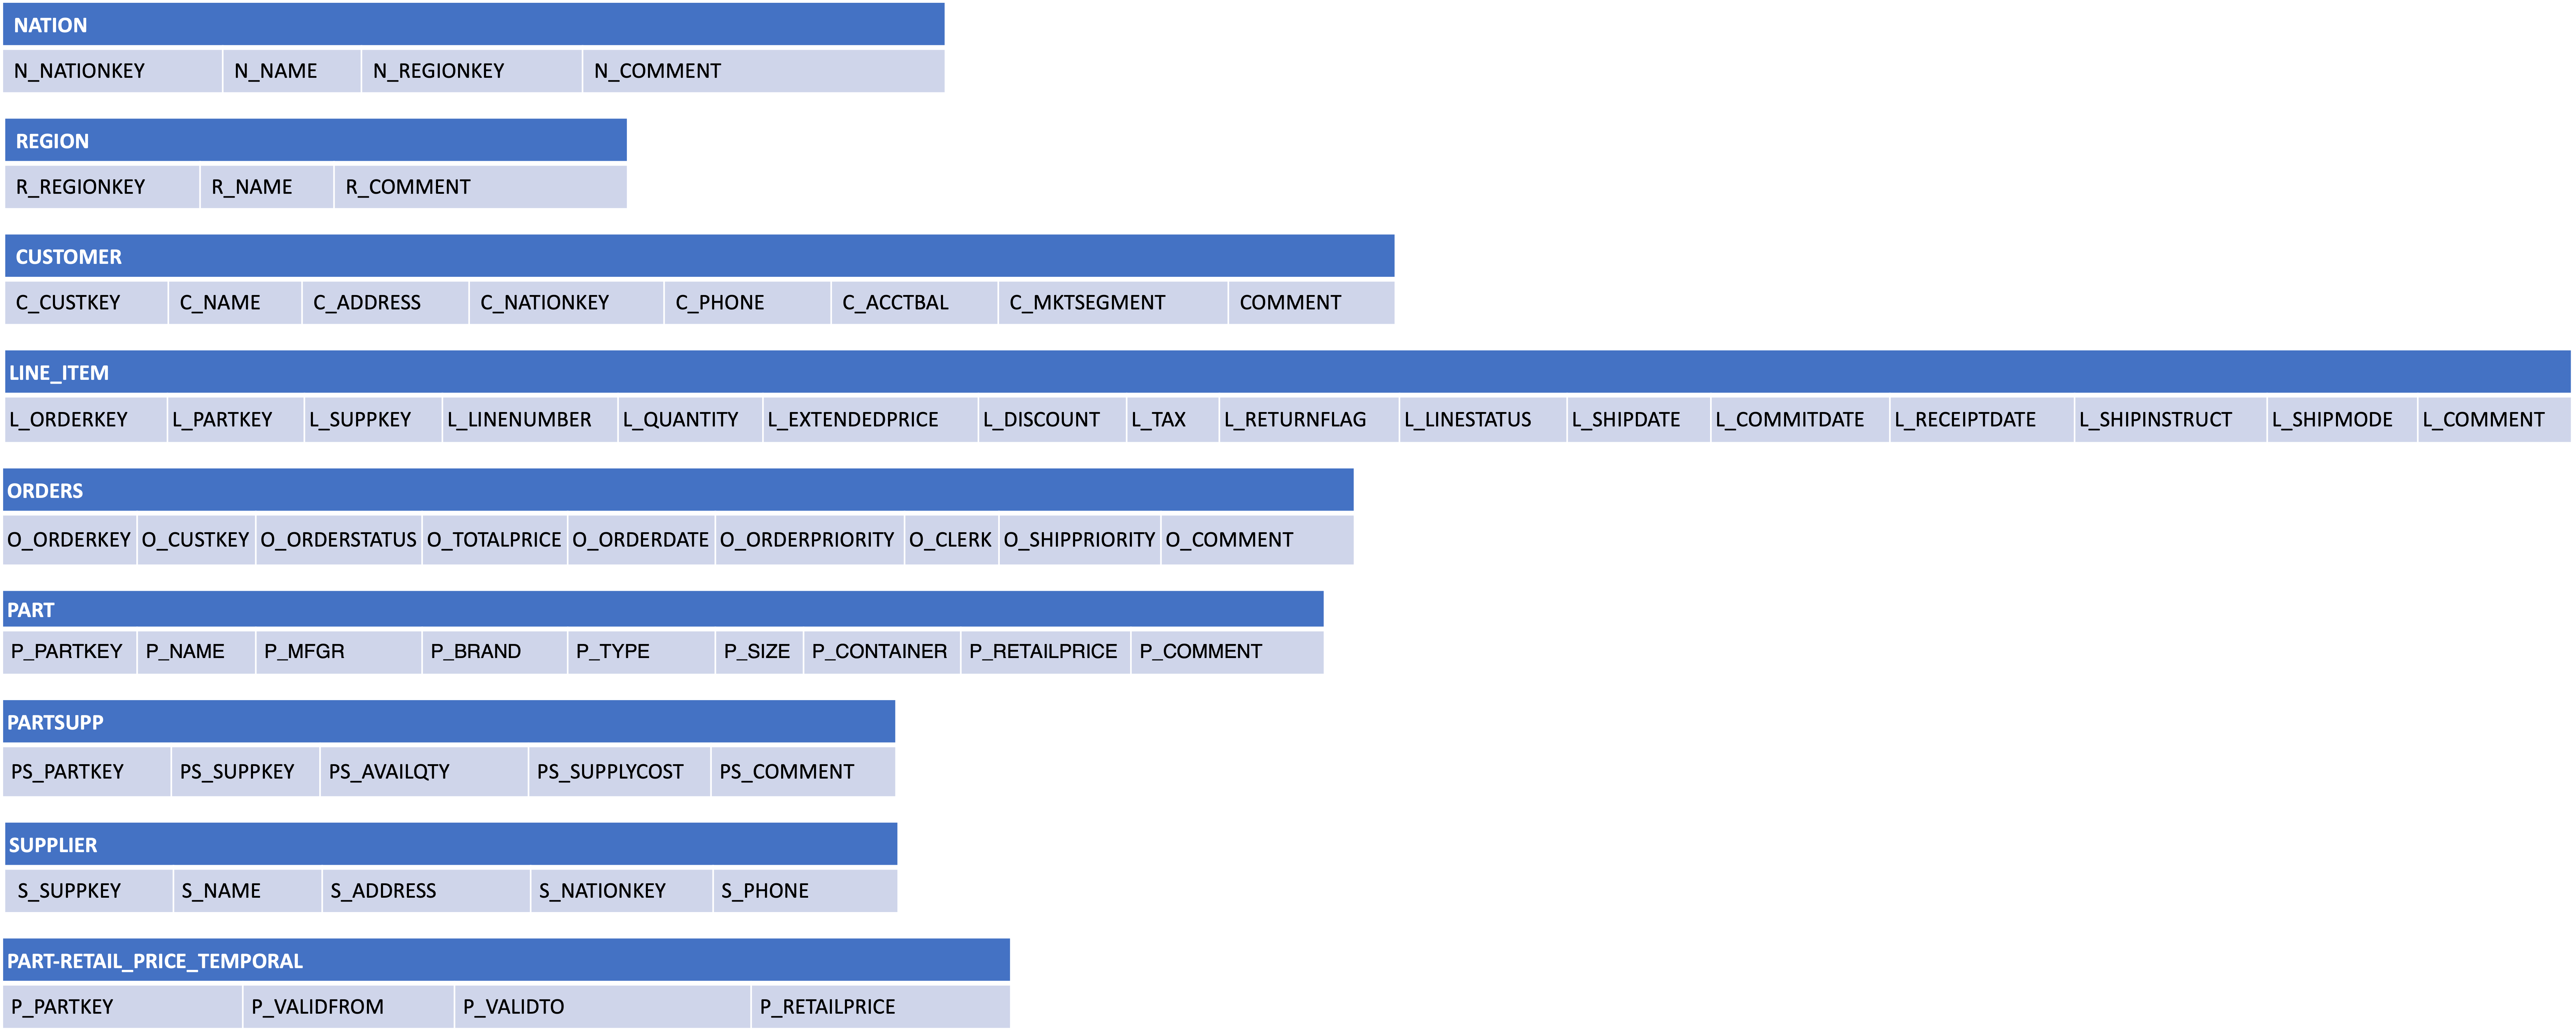 TPCH data delivery structure